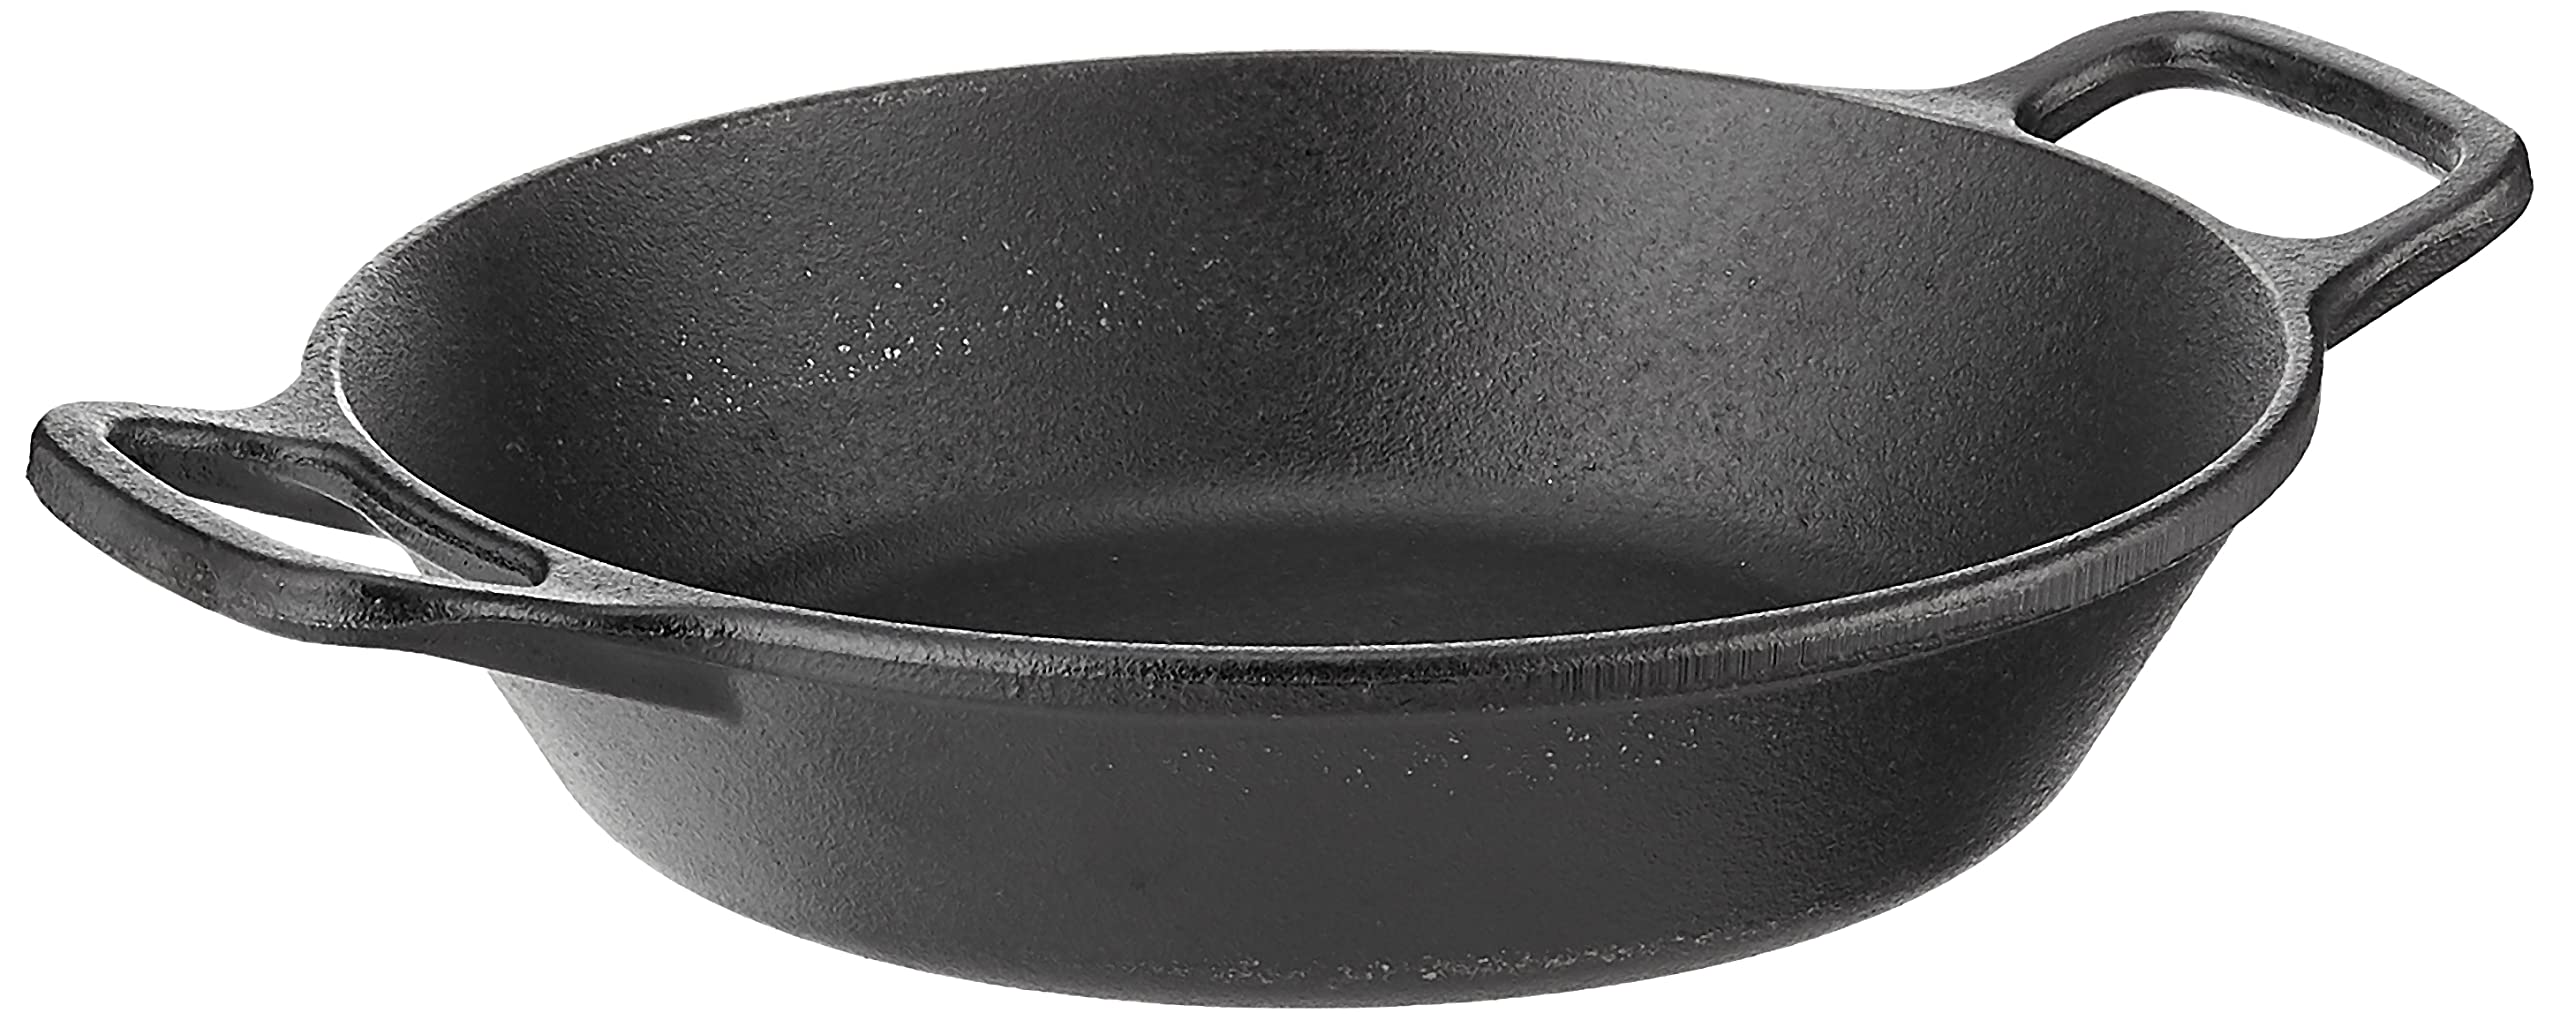 8" Lodge L5RPL3 Cast Iron Round Pan w/ Handles (Black) $12.90 + Free Shipping w/ Prime or on $35+